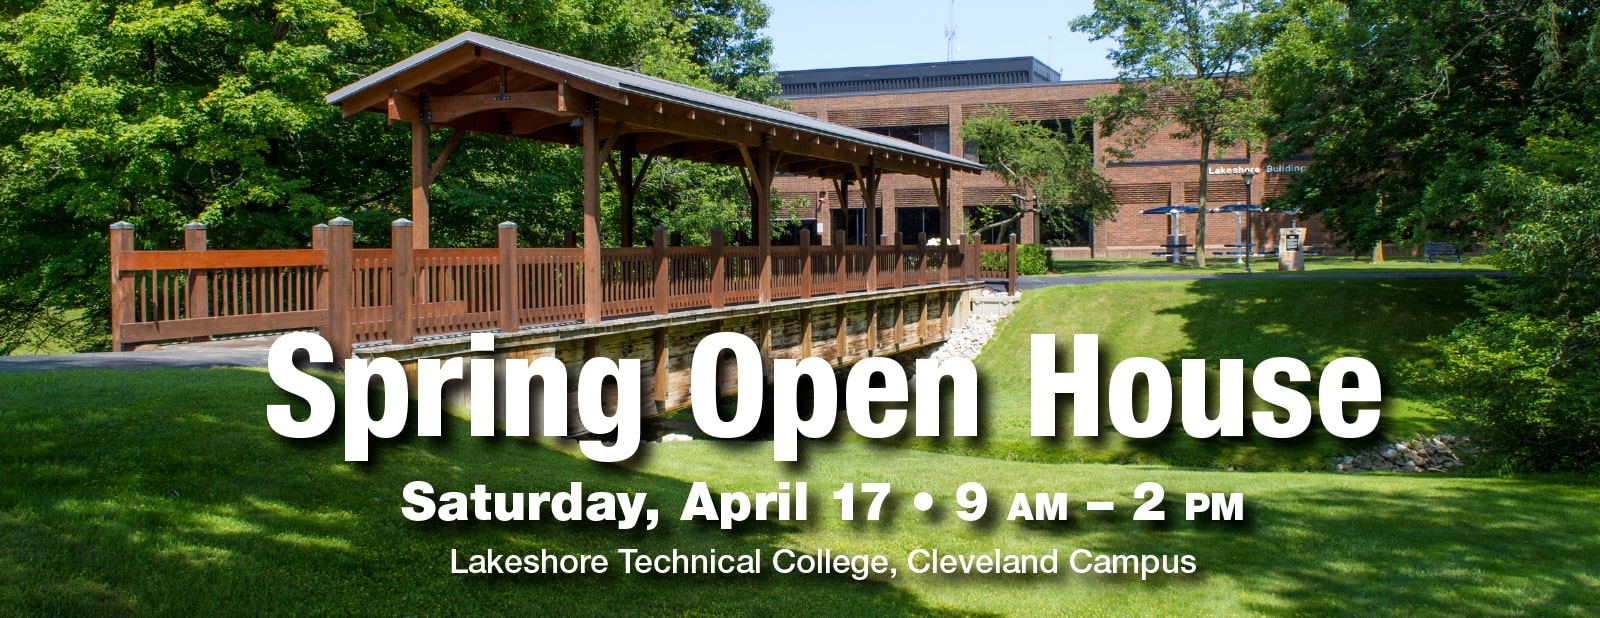 Lakeshore Technical College’s Spring Open House